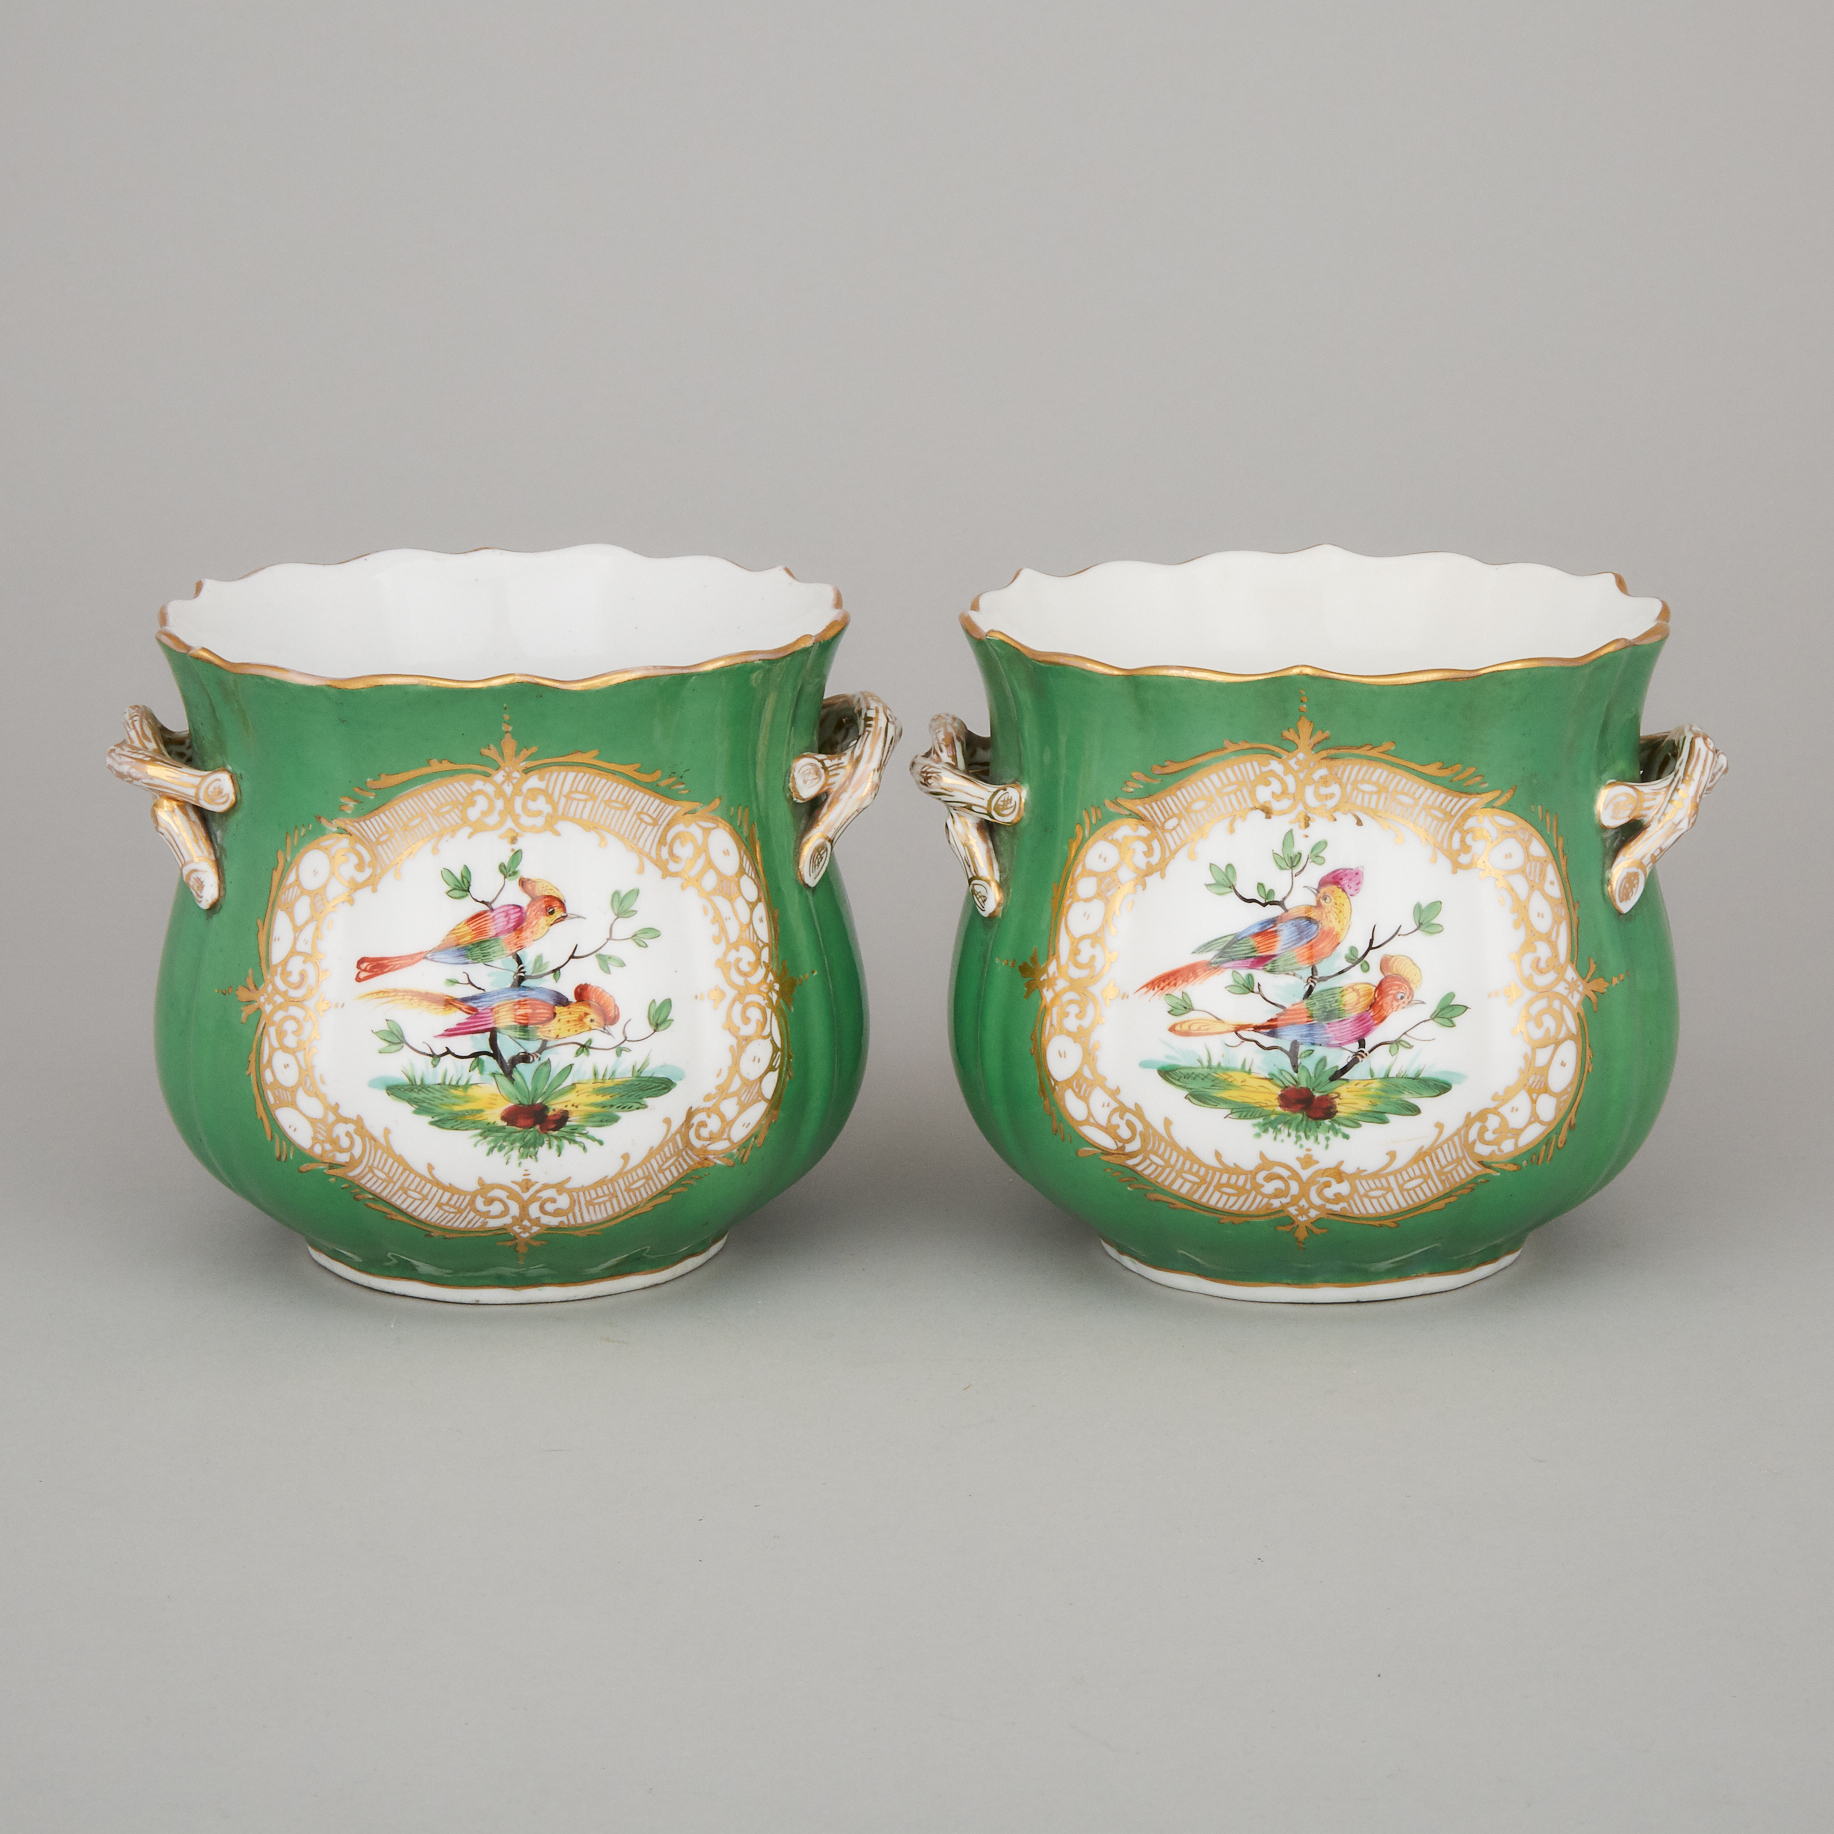 Pair of French Porcelain Apple Green and Gilt Cache Pots, early 20th century